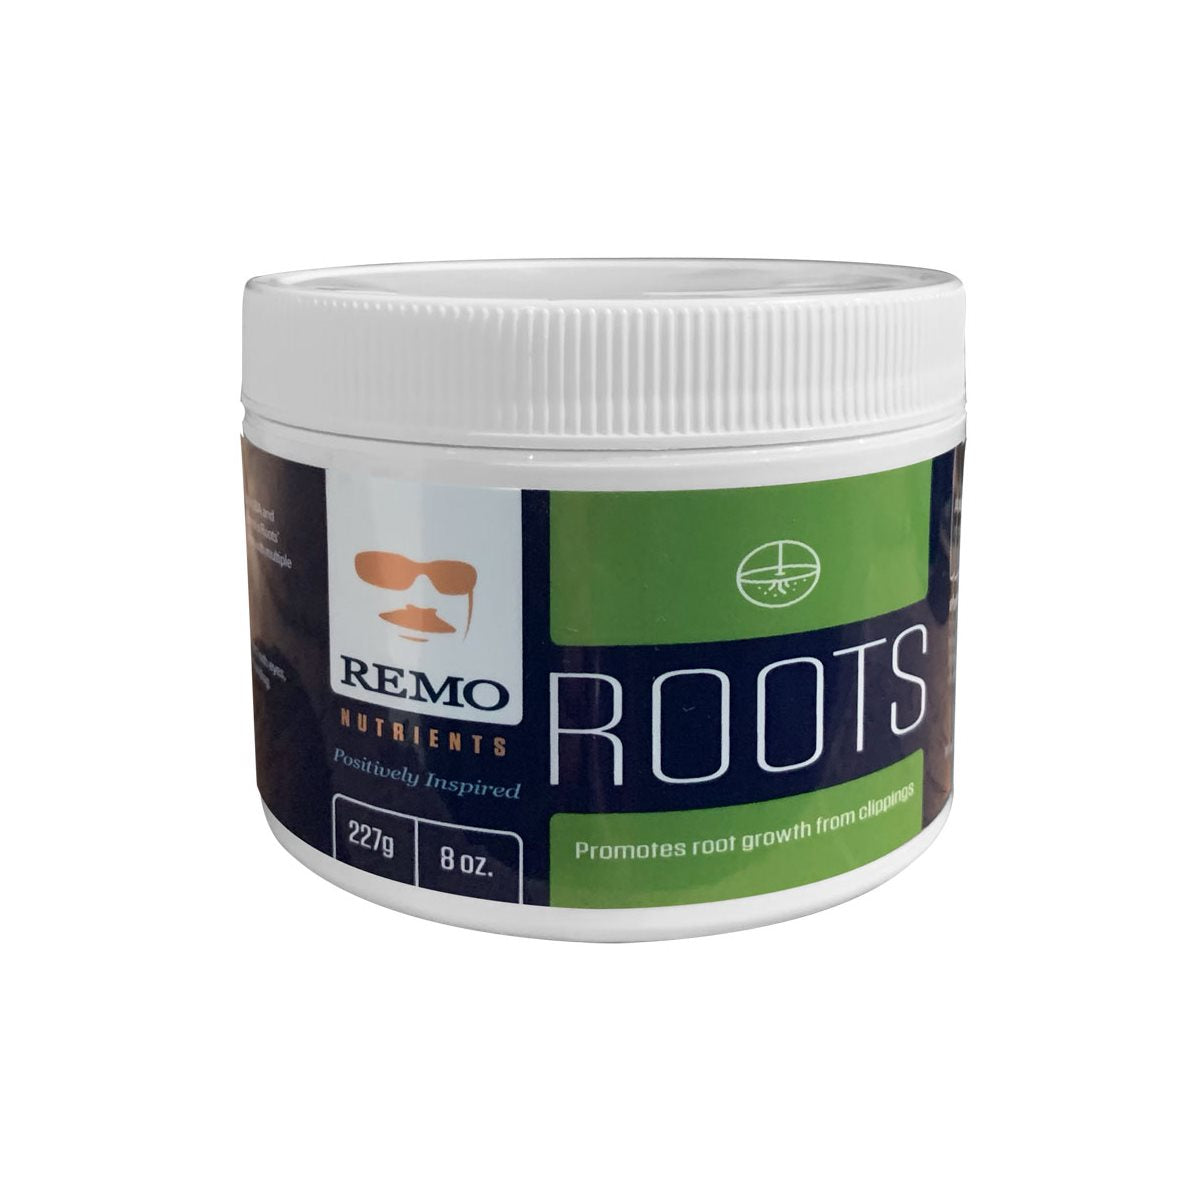 Remo Roots 227 gram